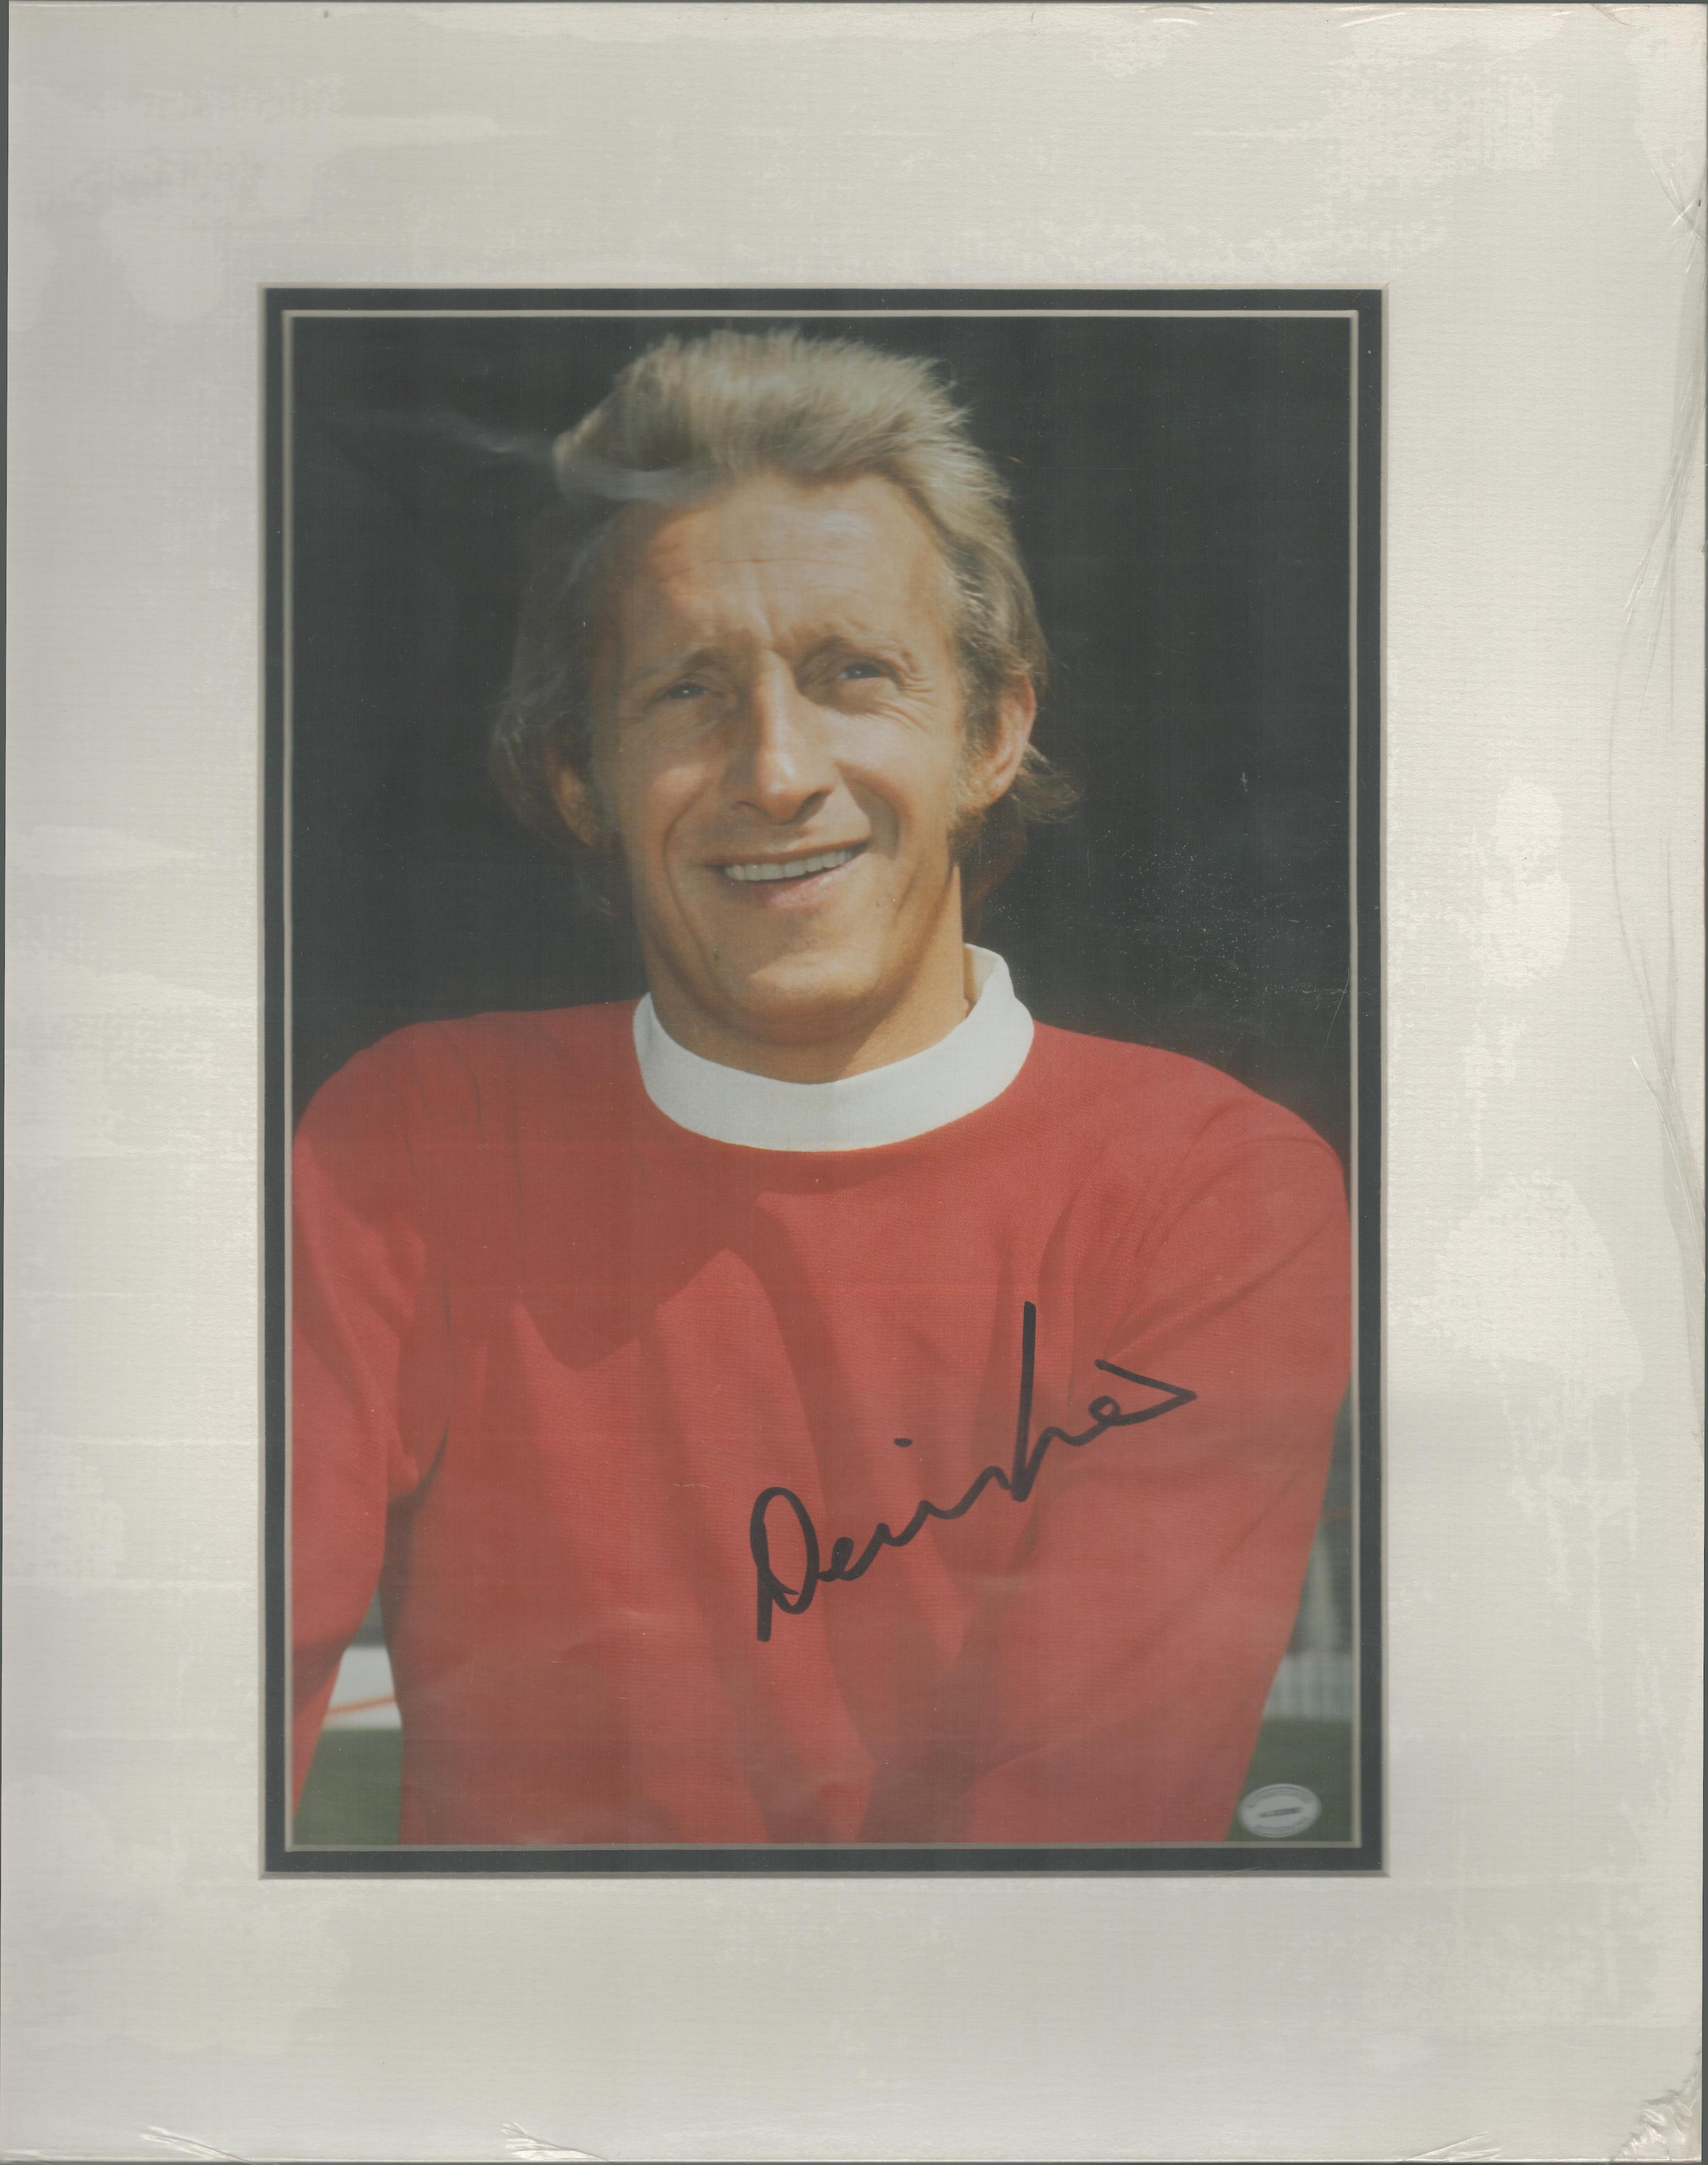 Denis Law signed 15x12 inch overall mounted colour photo.